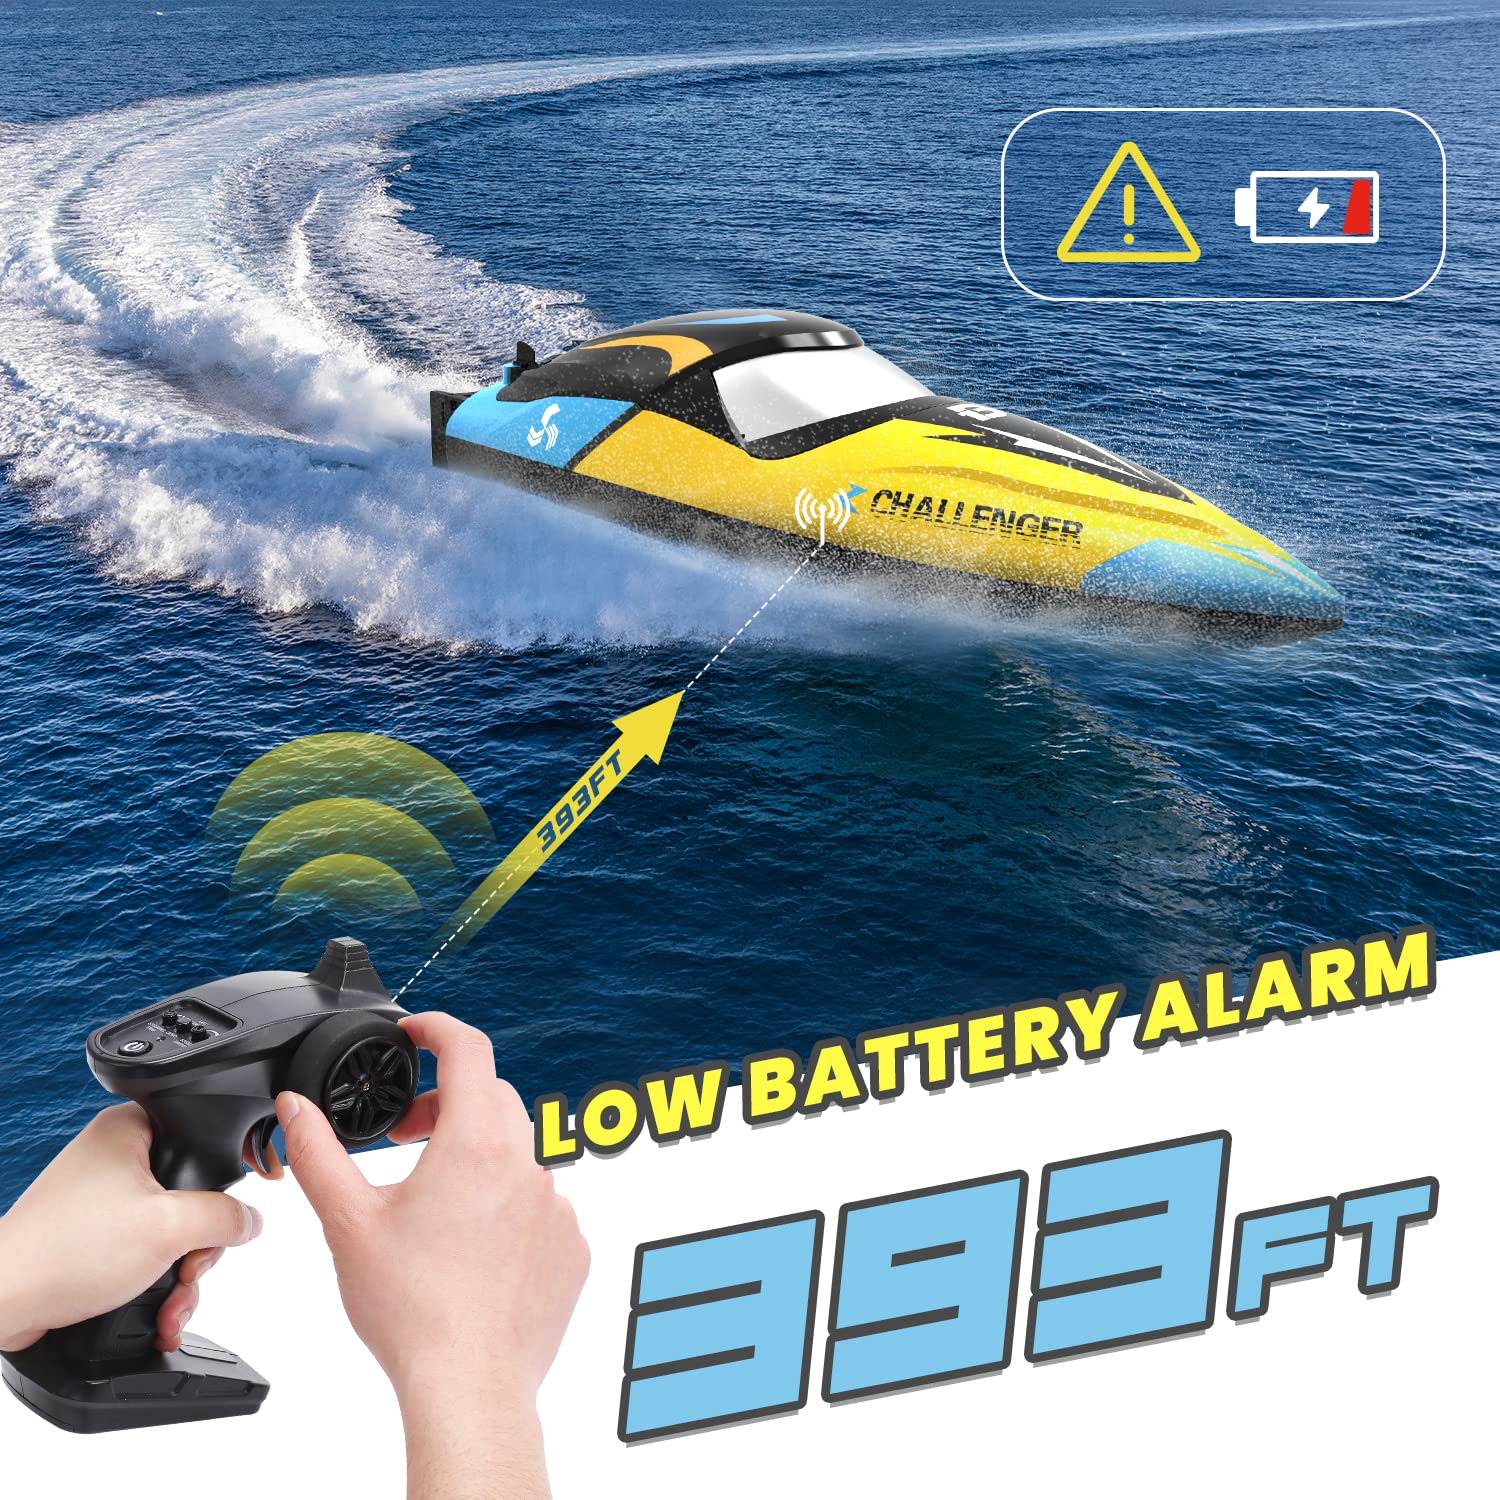 DEERC Brushless RC Boat, 30+ mph Fast Remote Control Boats with Never Capsize&Low Battery Alarm Function, 2.4GHz Racing Boat with LED Lights for Seas, Pools&Lakes, Speed Boat Toy for Adults Boys&Girls